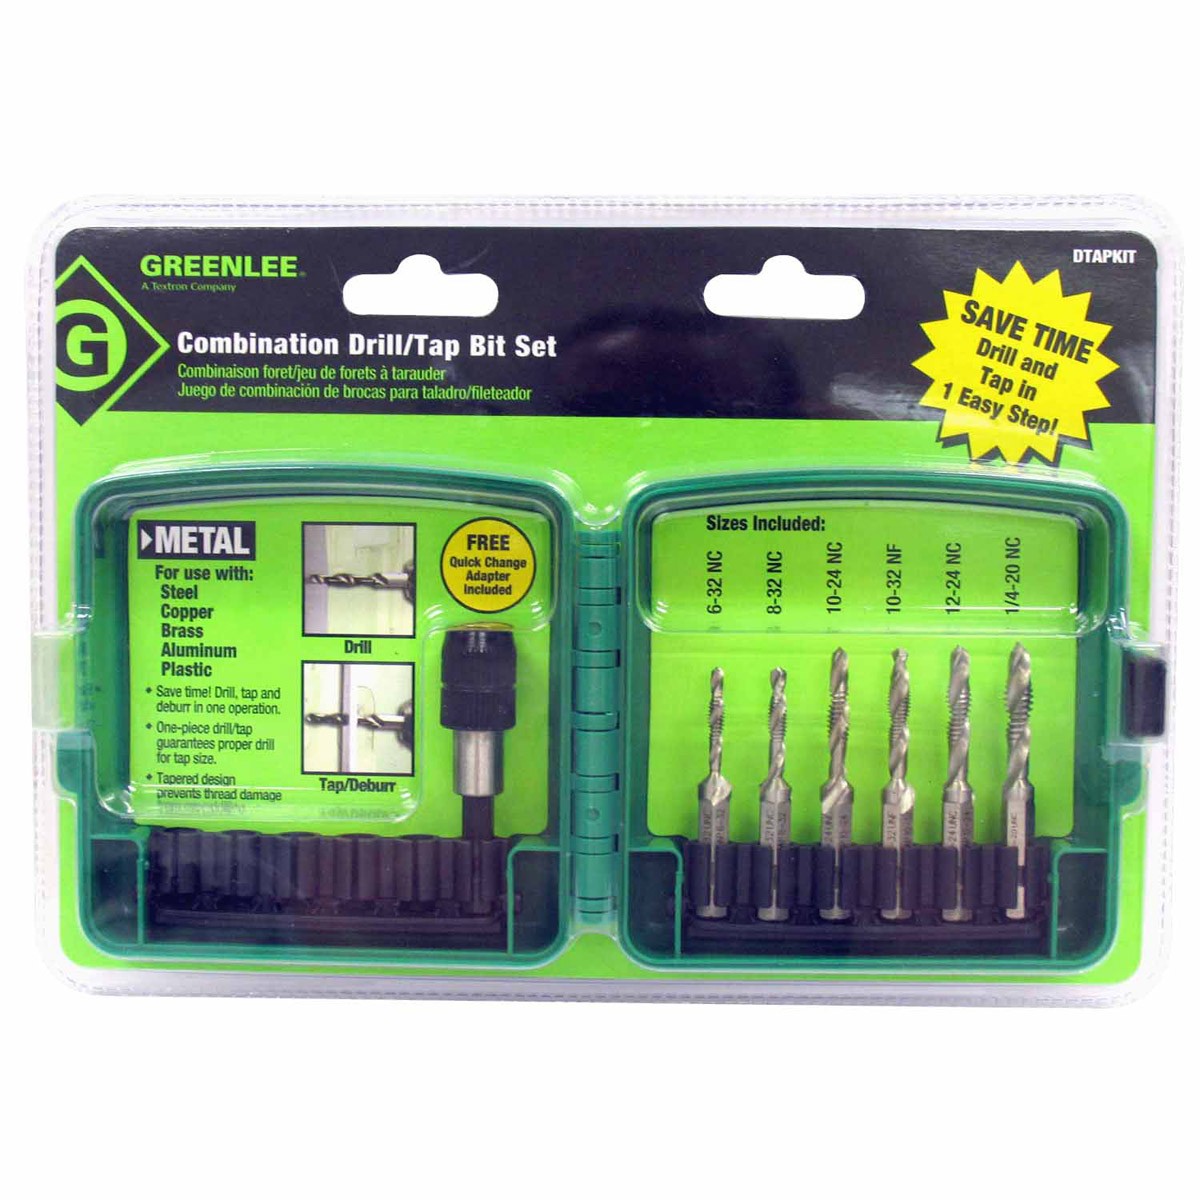 Greenlee DTAPKIT 6-32 to 1/4-20 6 Piece Drill/Tap Set